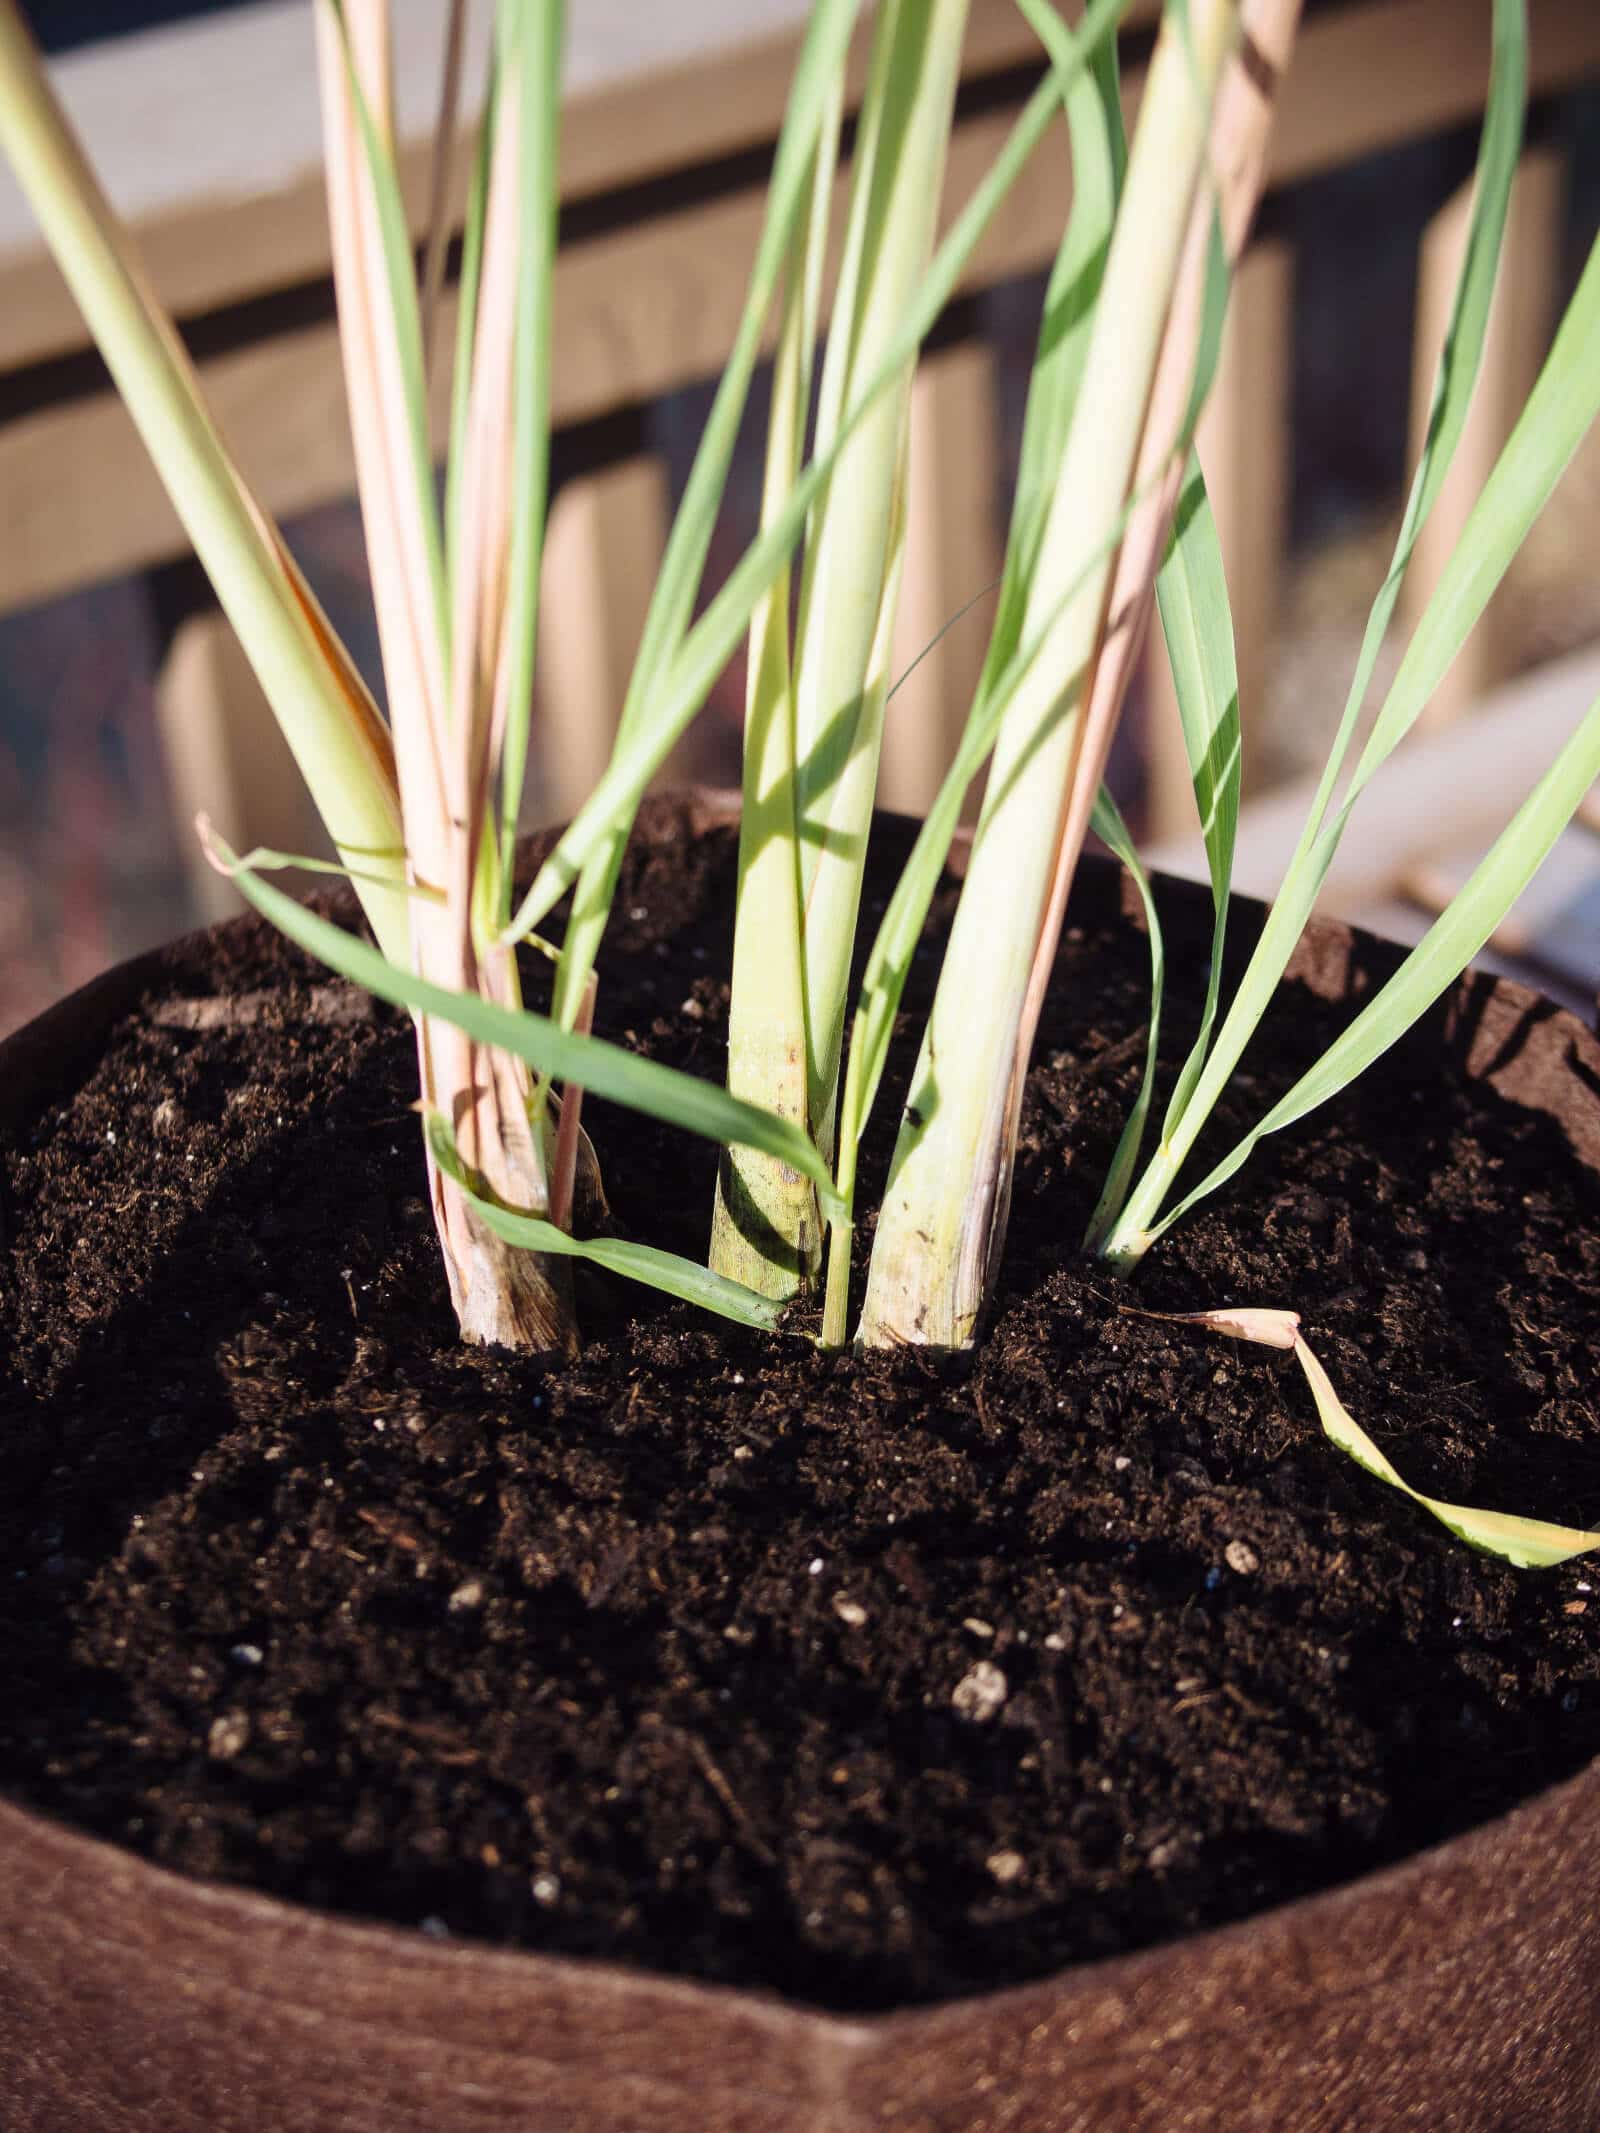 Plant the lemongrass with the crown of the stalks just below the soil surface